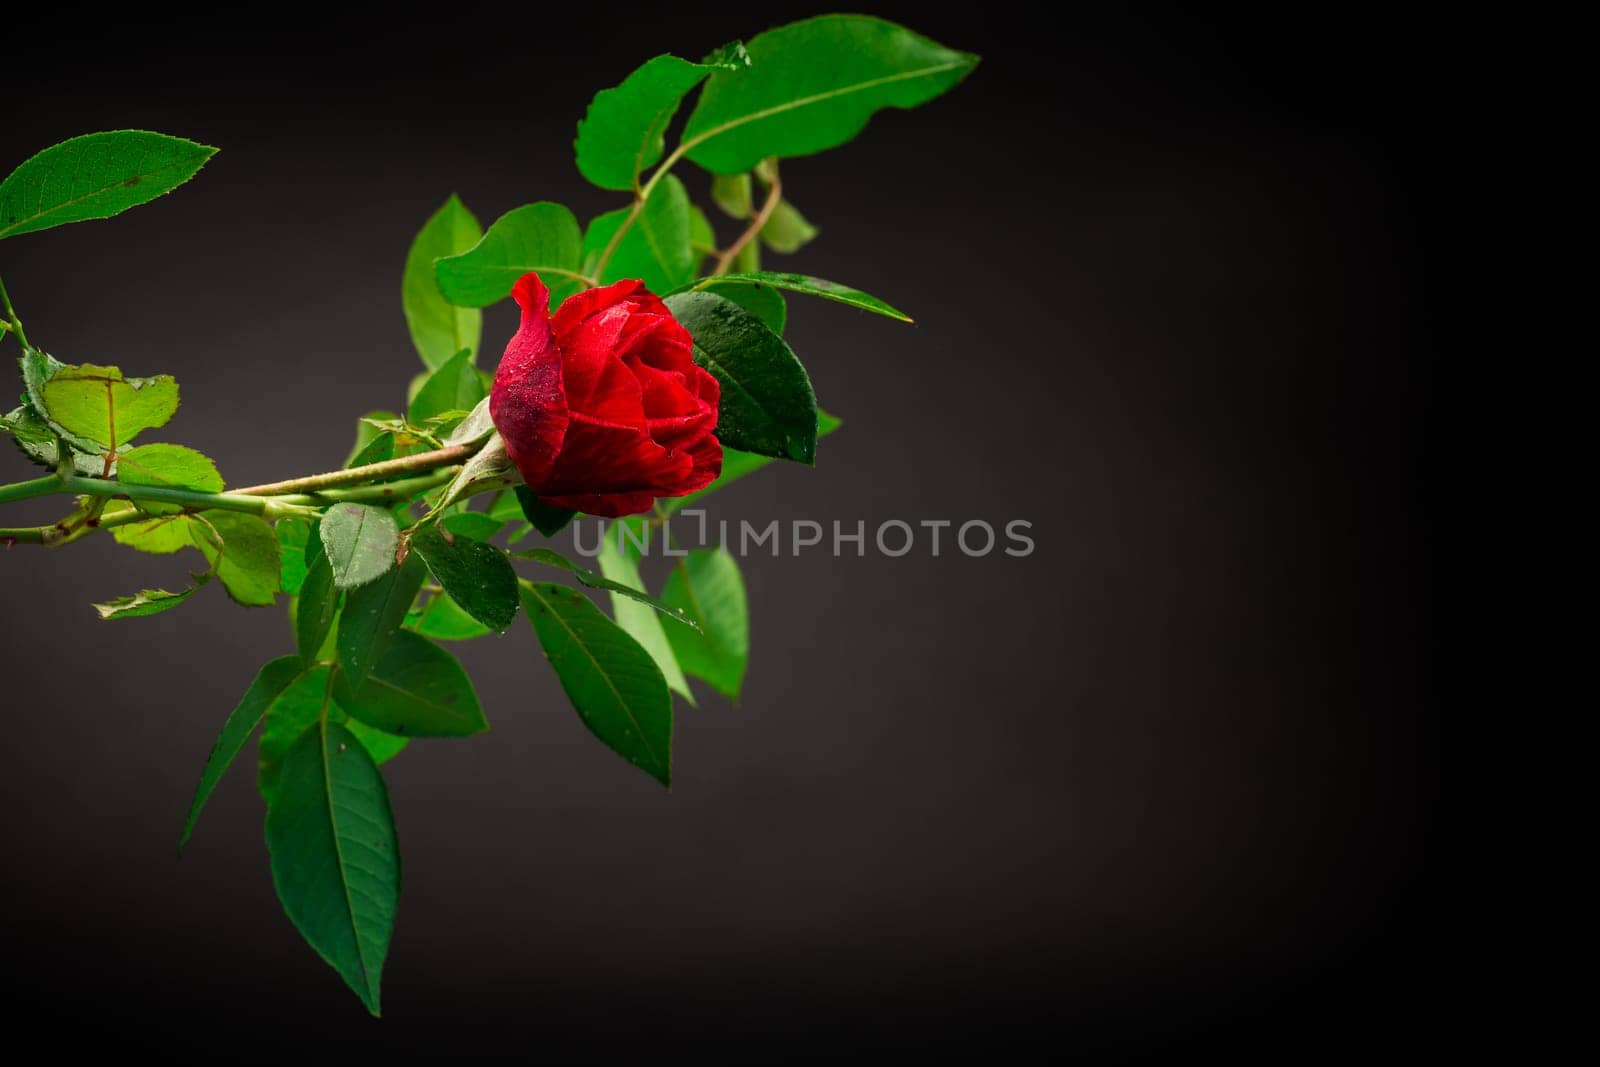 Red rose on a branch with foliage on a black background. by Rawlik